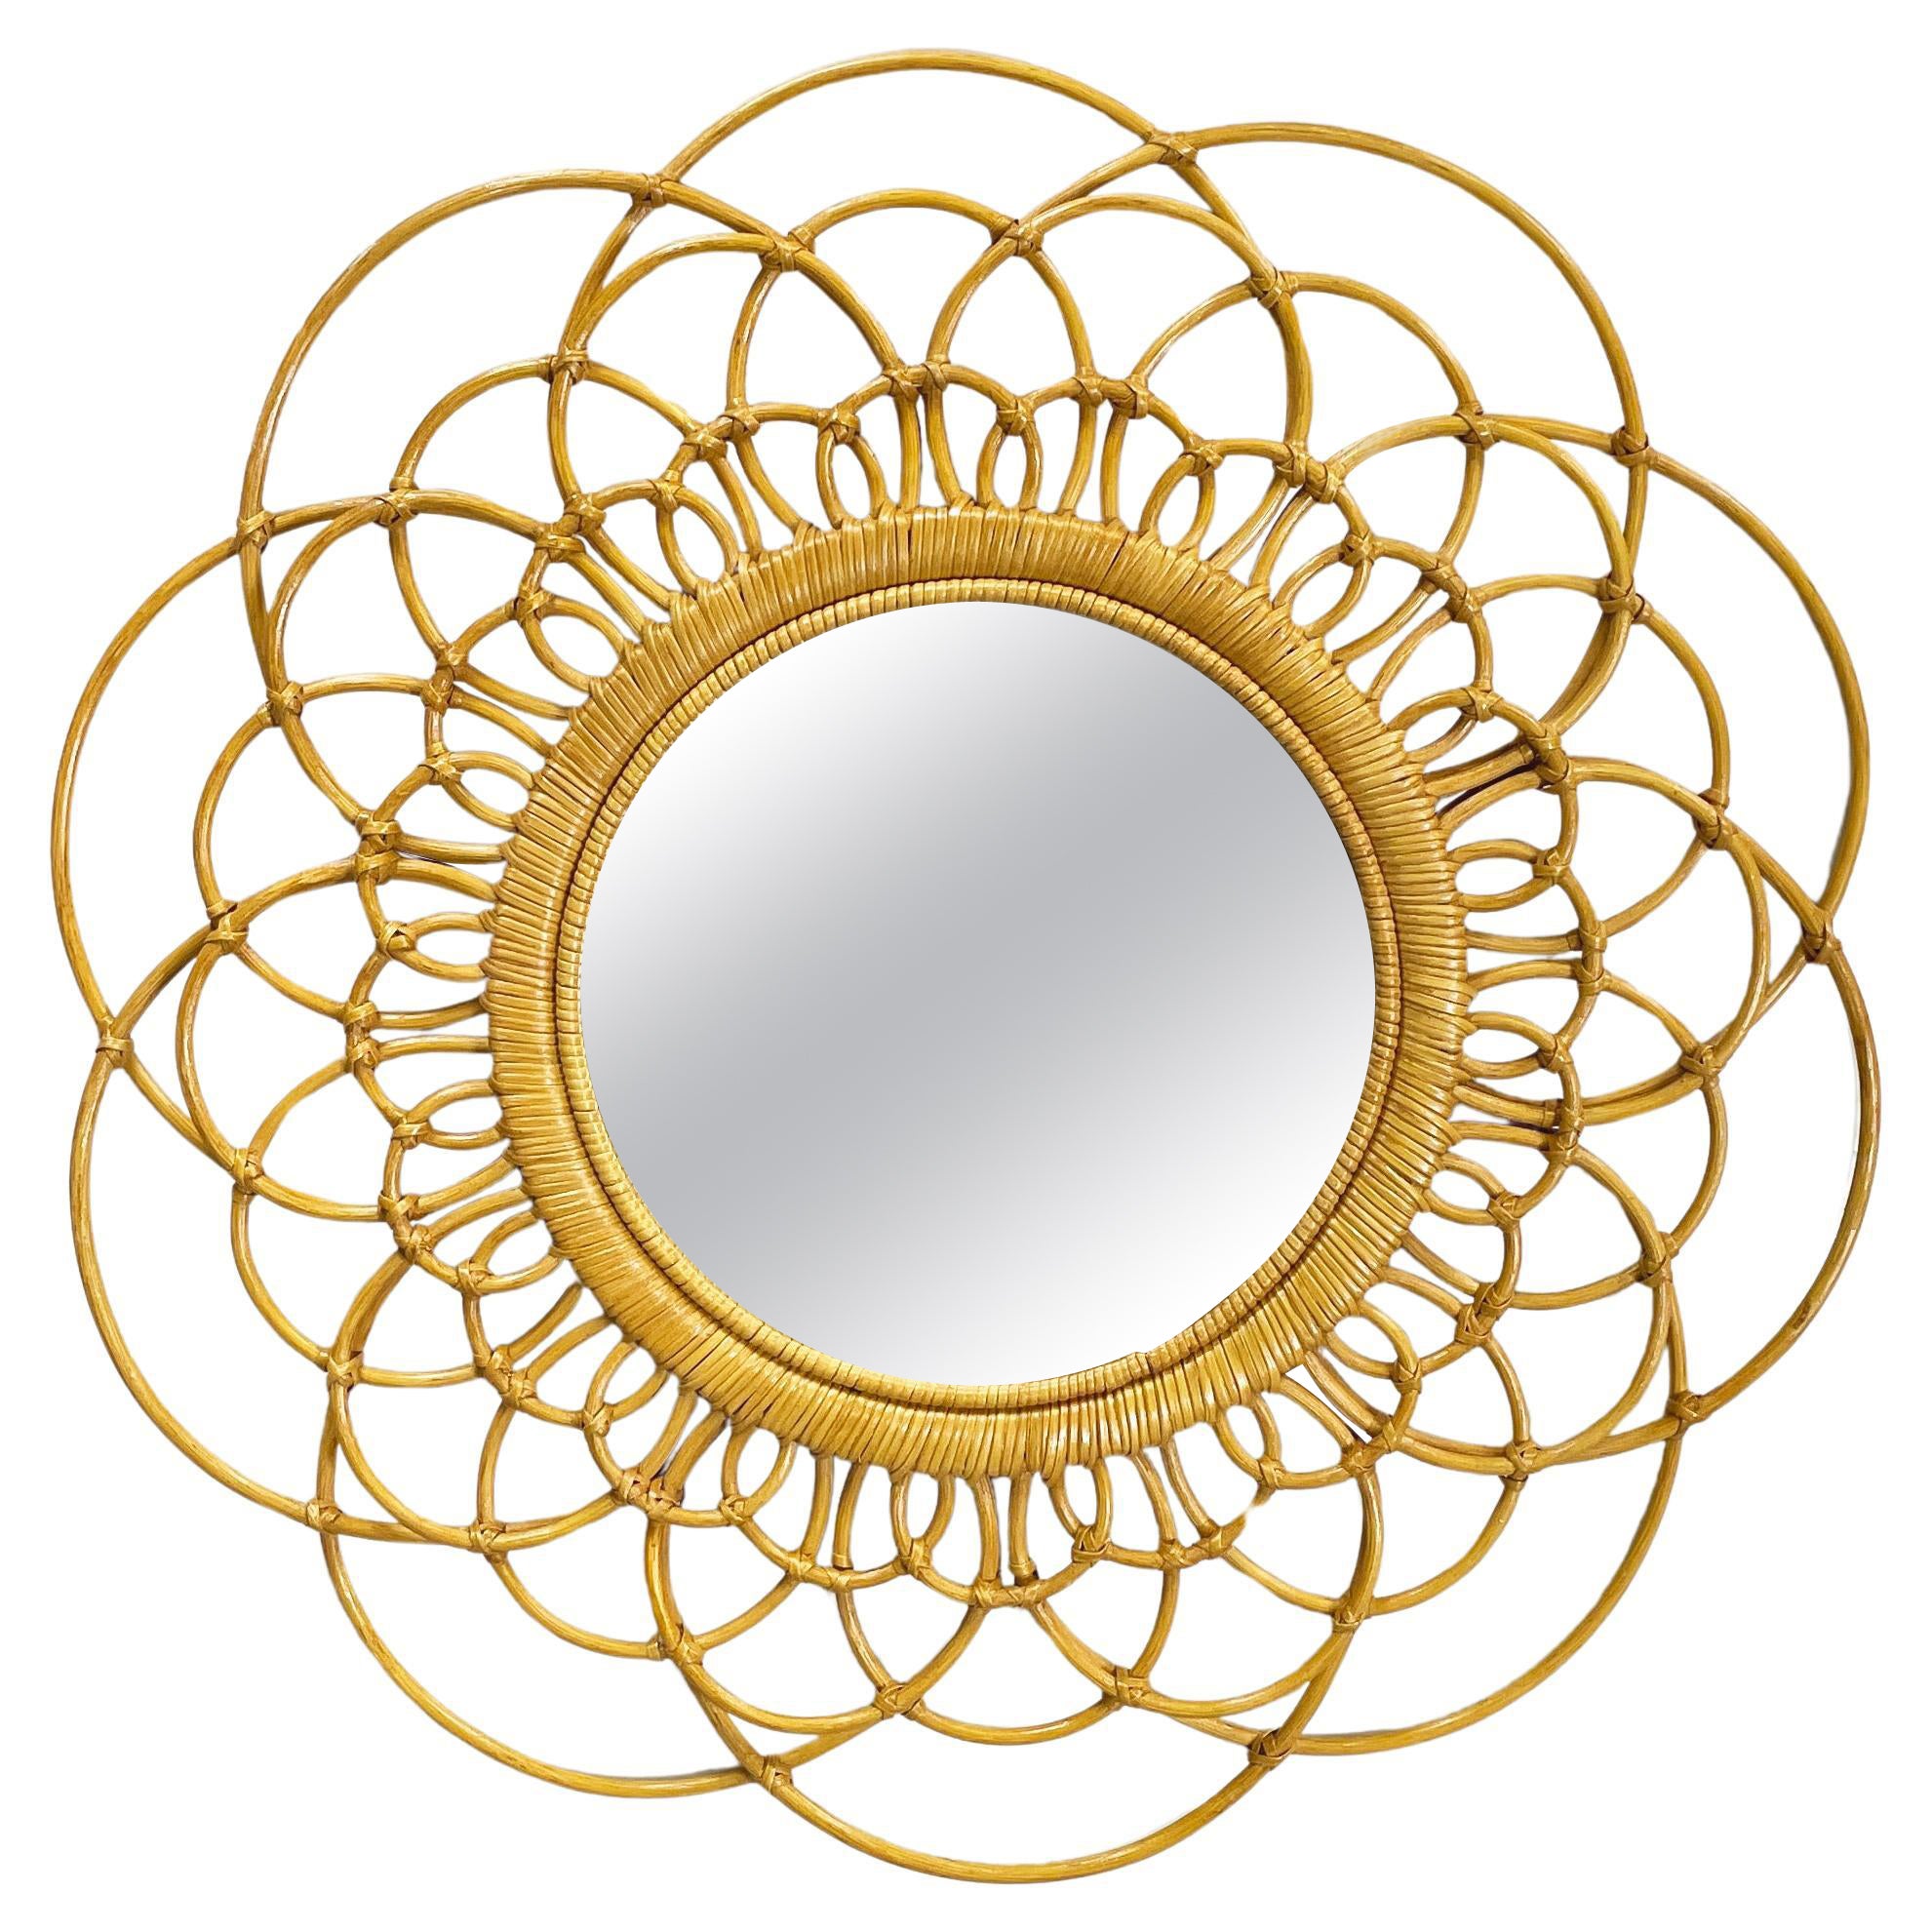 Italian mid-century modern Round rattan wall mirror with curved bamboo, 1960s For Sale